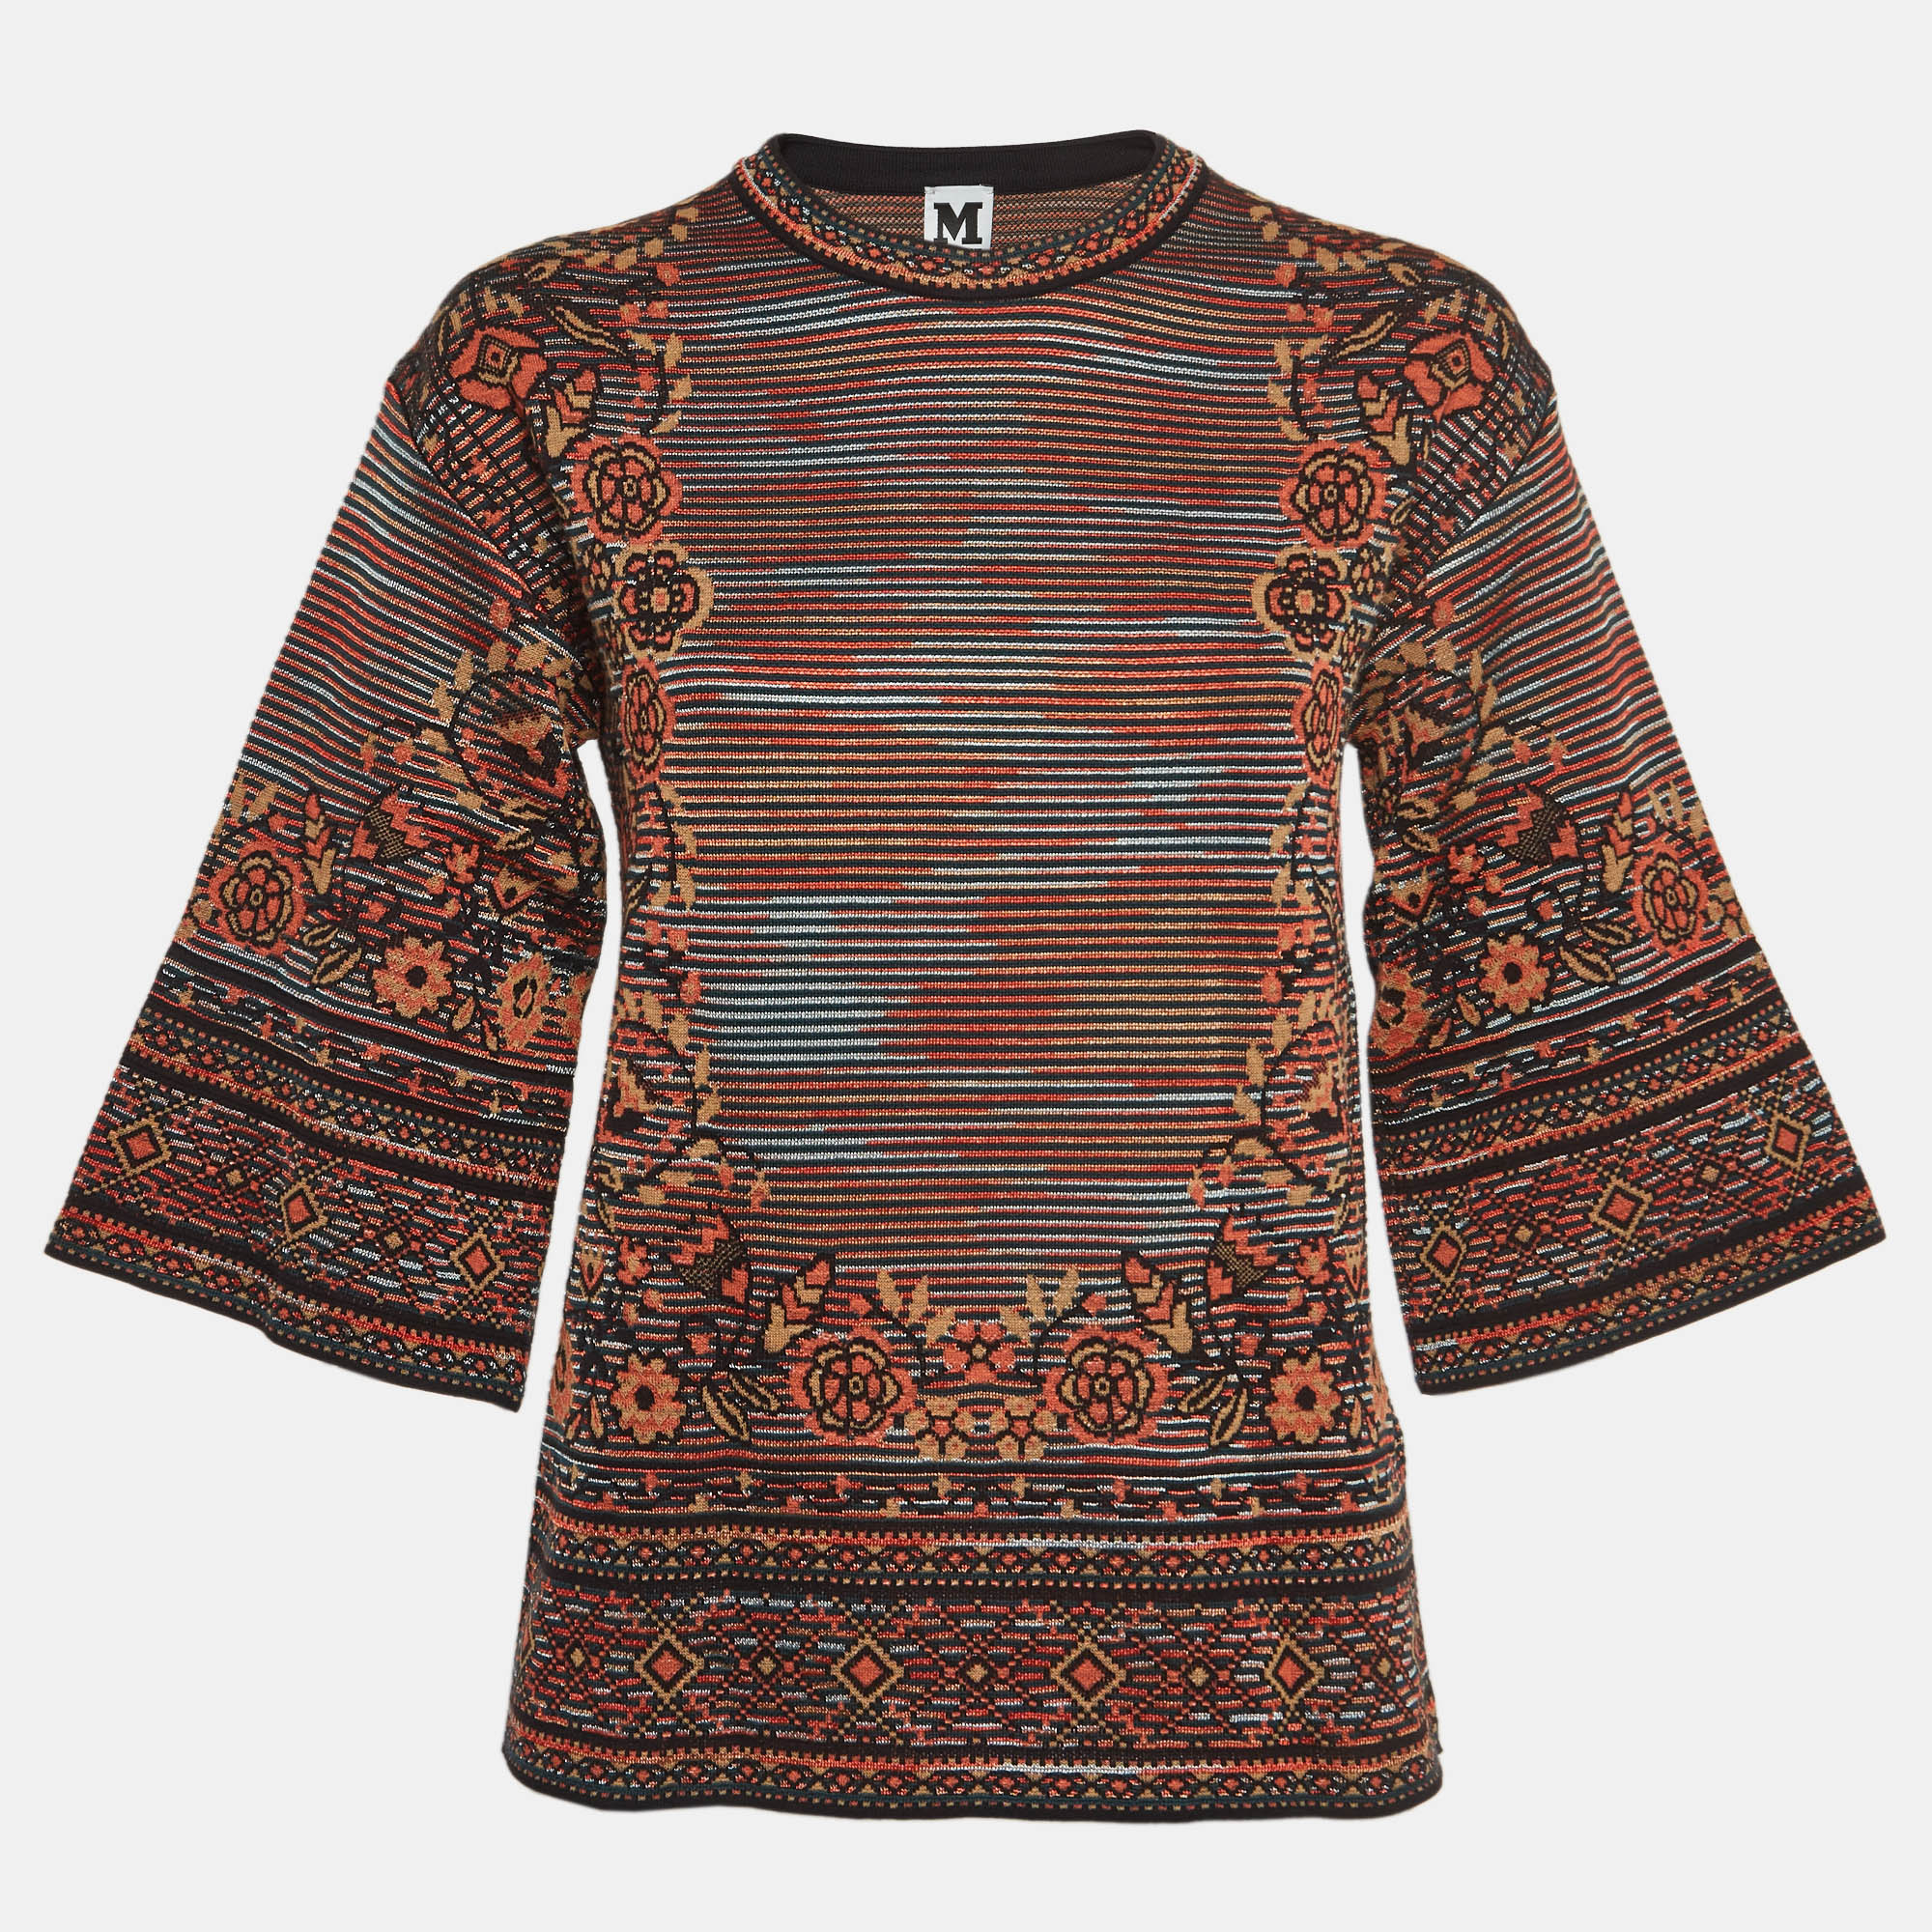 

M Missoni Multicolor Patterned Knit Bell Sleeves Top S